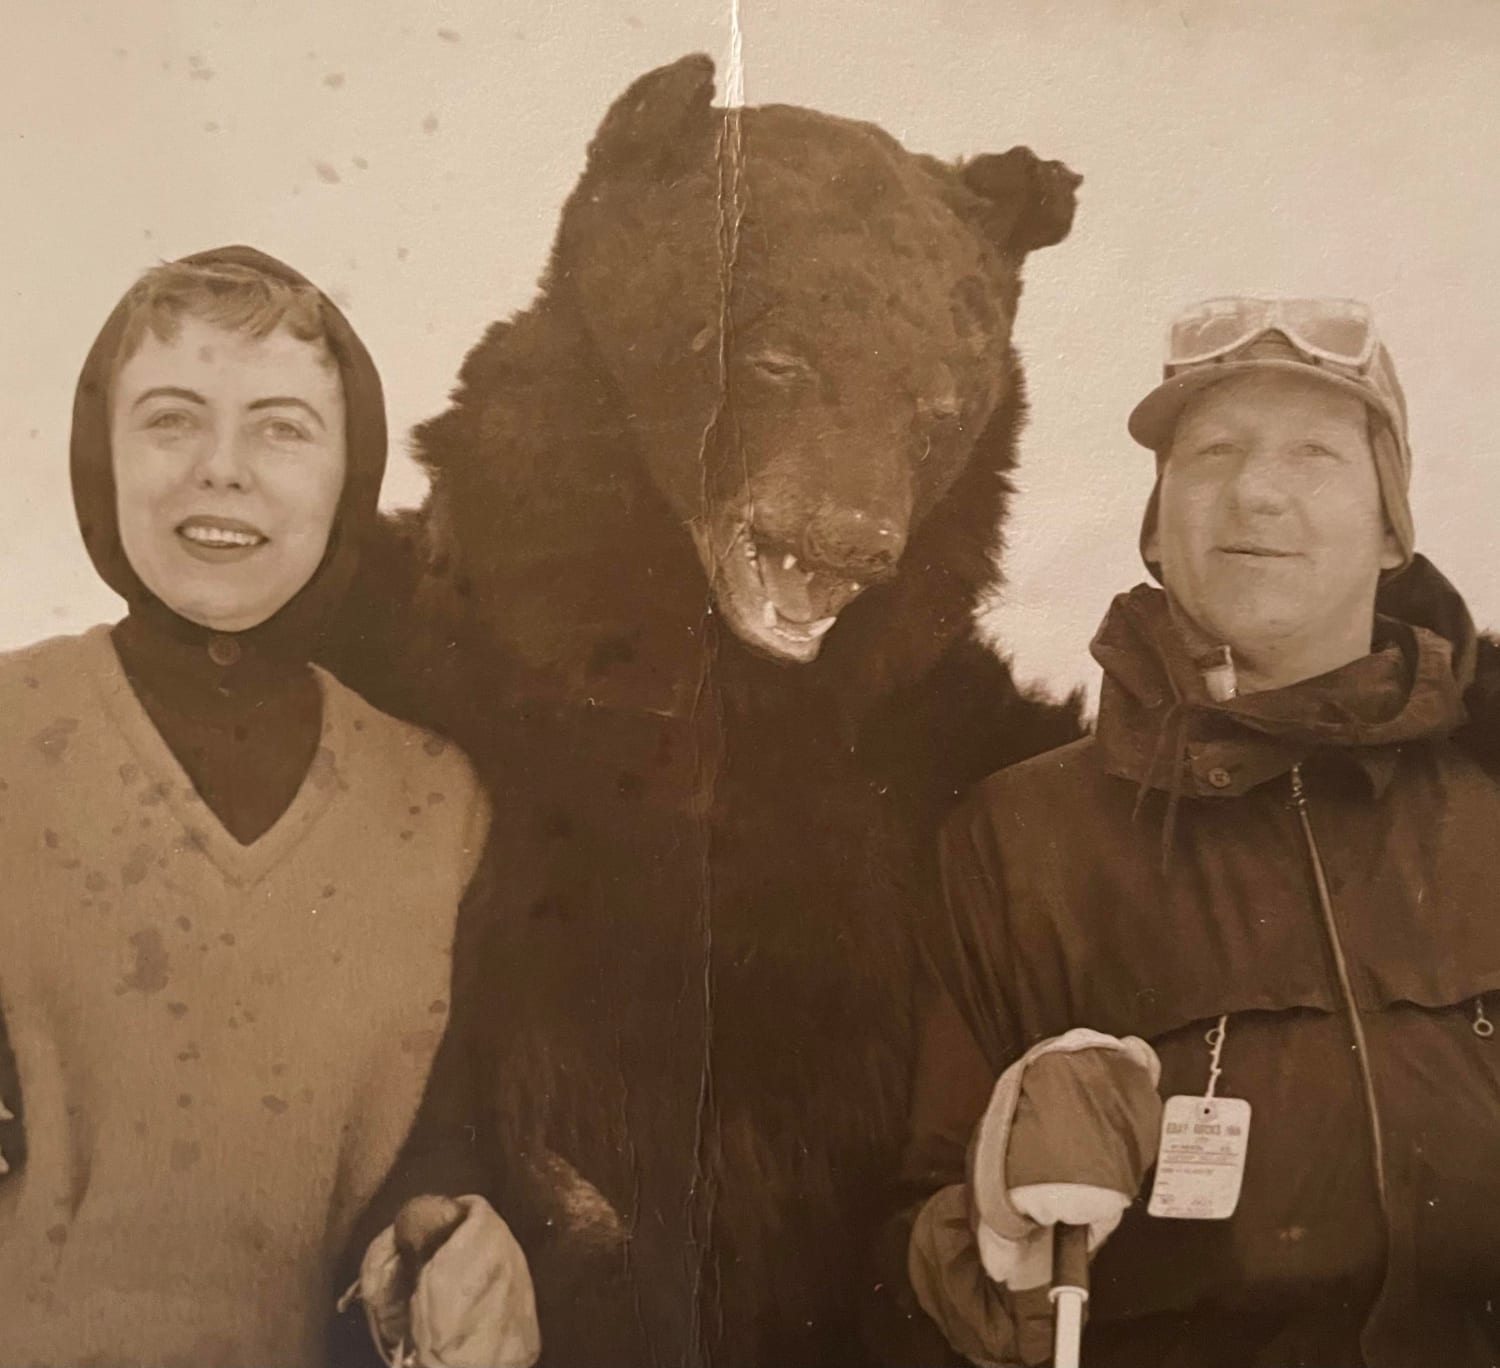 My grandfather in Austria (I believe) skiing with someone in a horrible taxidermy bear suit (1960s)